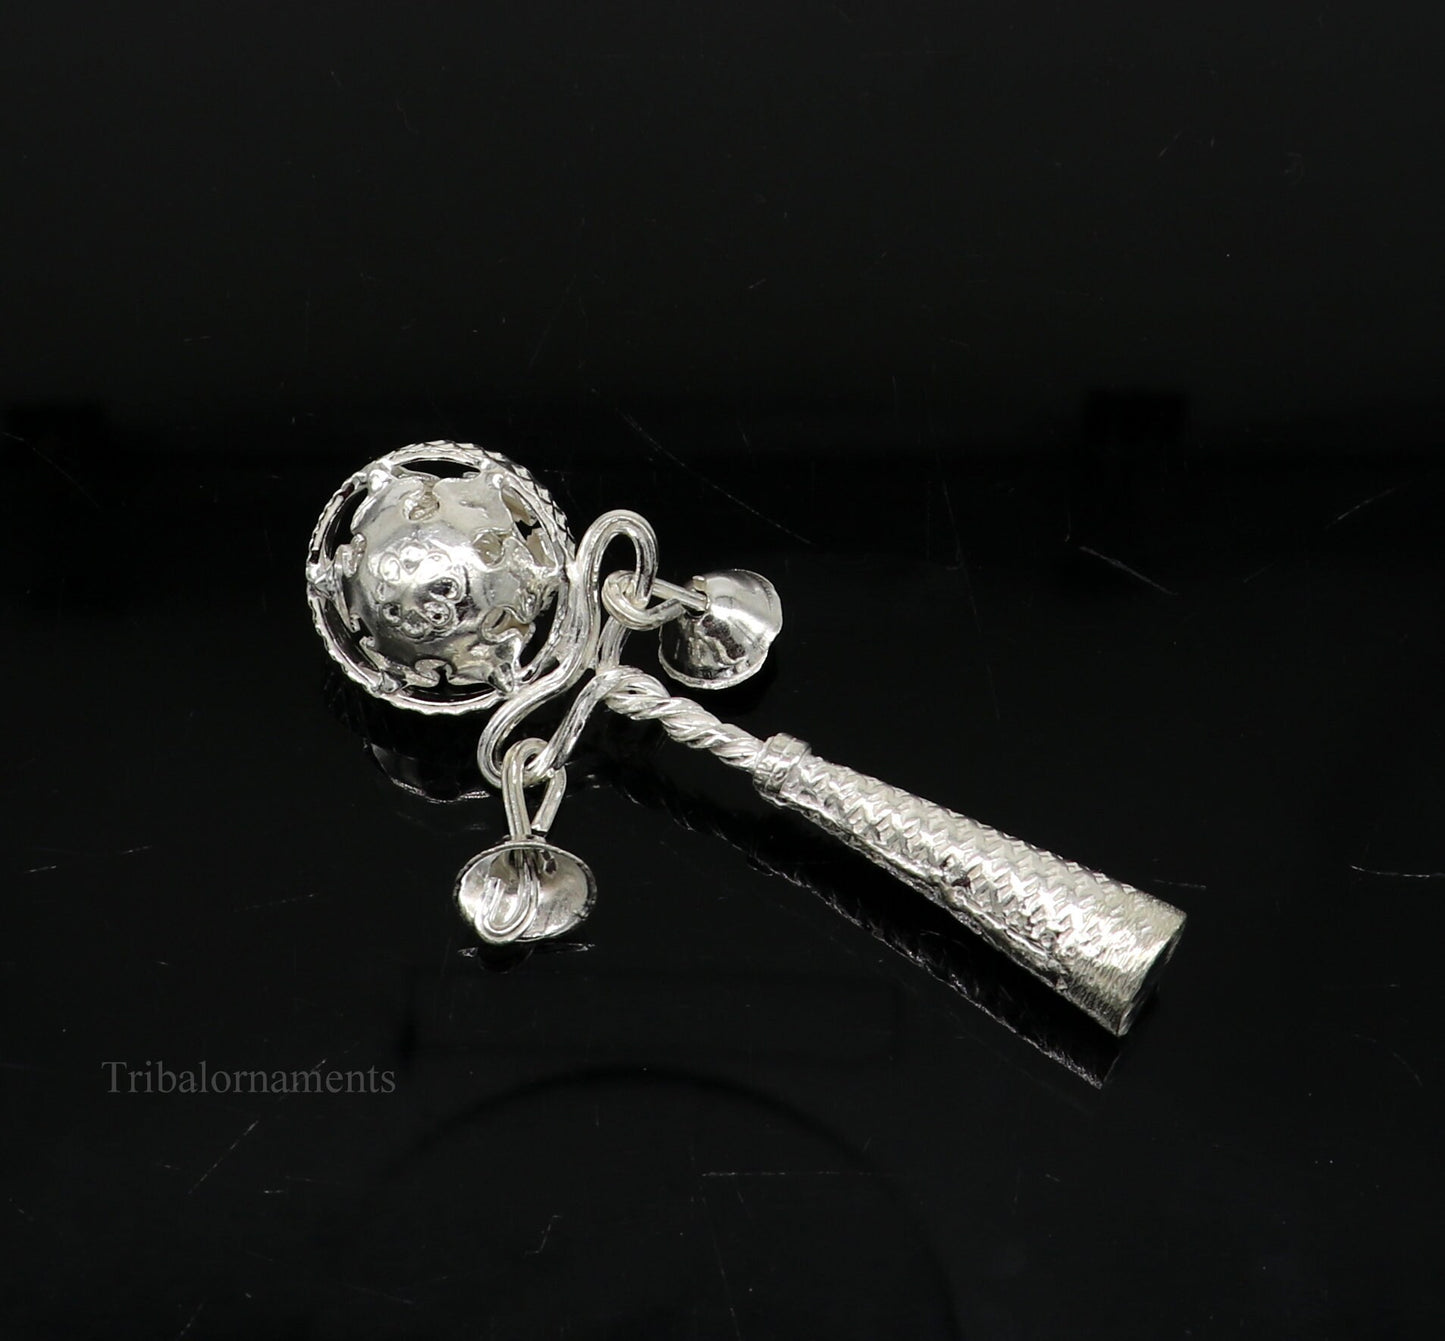 Solid sterling silver handmade design new born baby gifting bells toy, baby krishna gifting toy, silver whistle, silver temple article su407 - TRIBAL ORNAMENTS